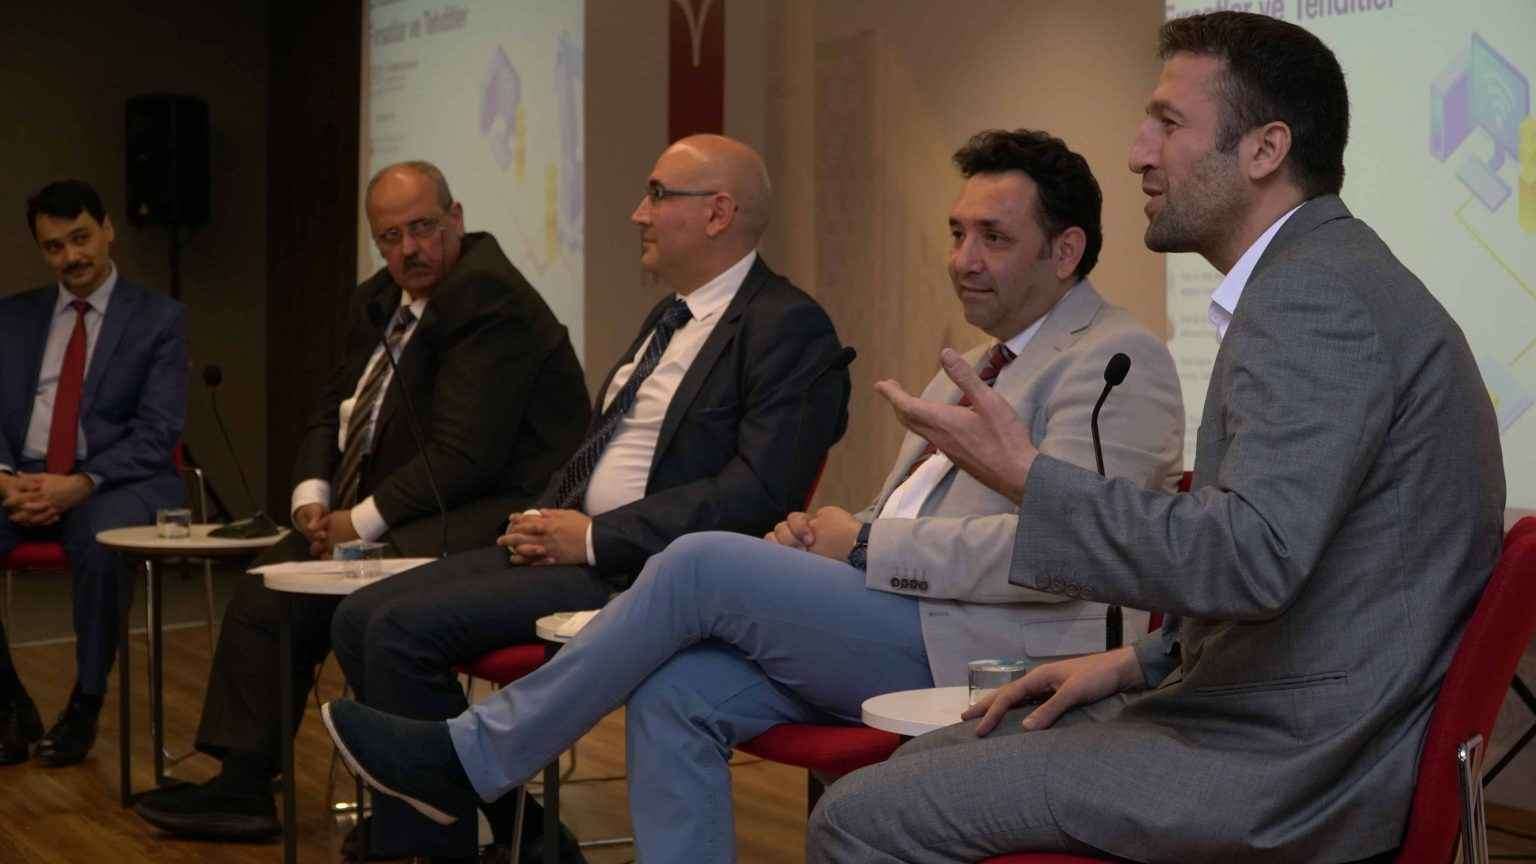 Industry 4.0: Opportunities and Threats Panel Held